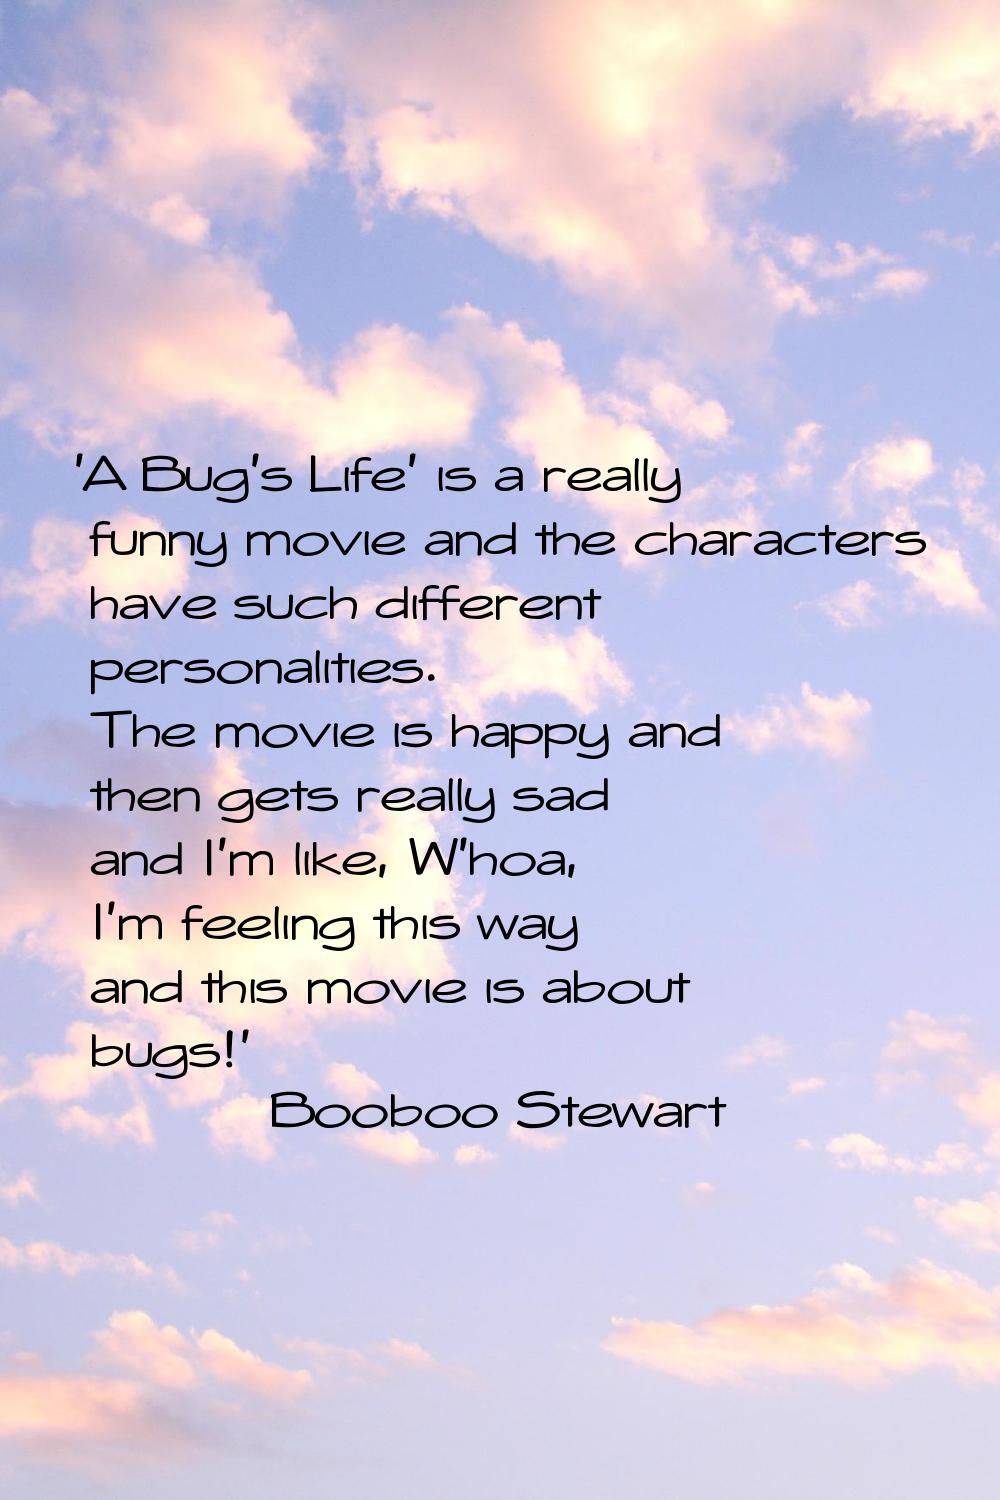 'A Bug's Life' is a really funny movie and the characters have such different personalities. The mo